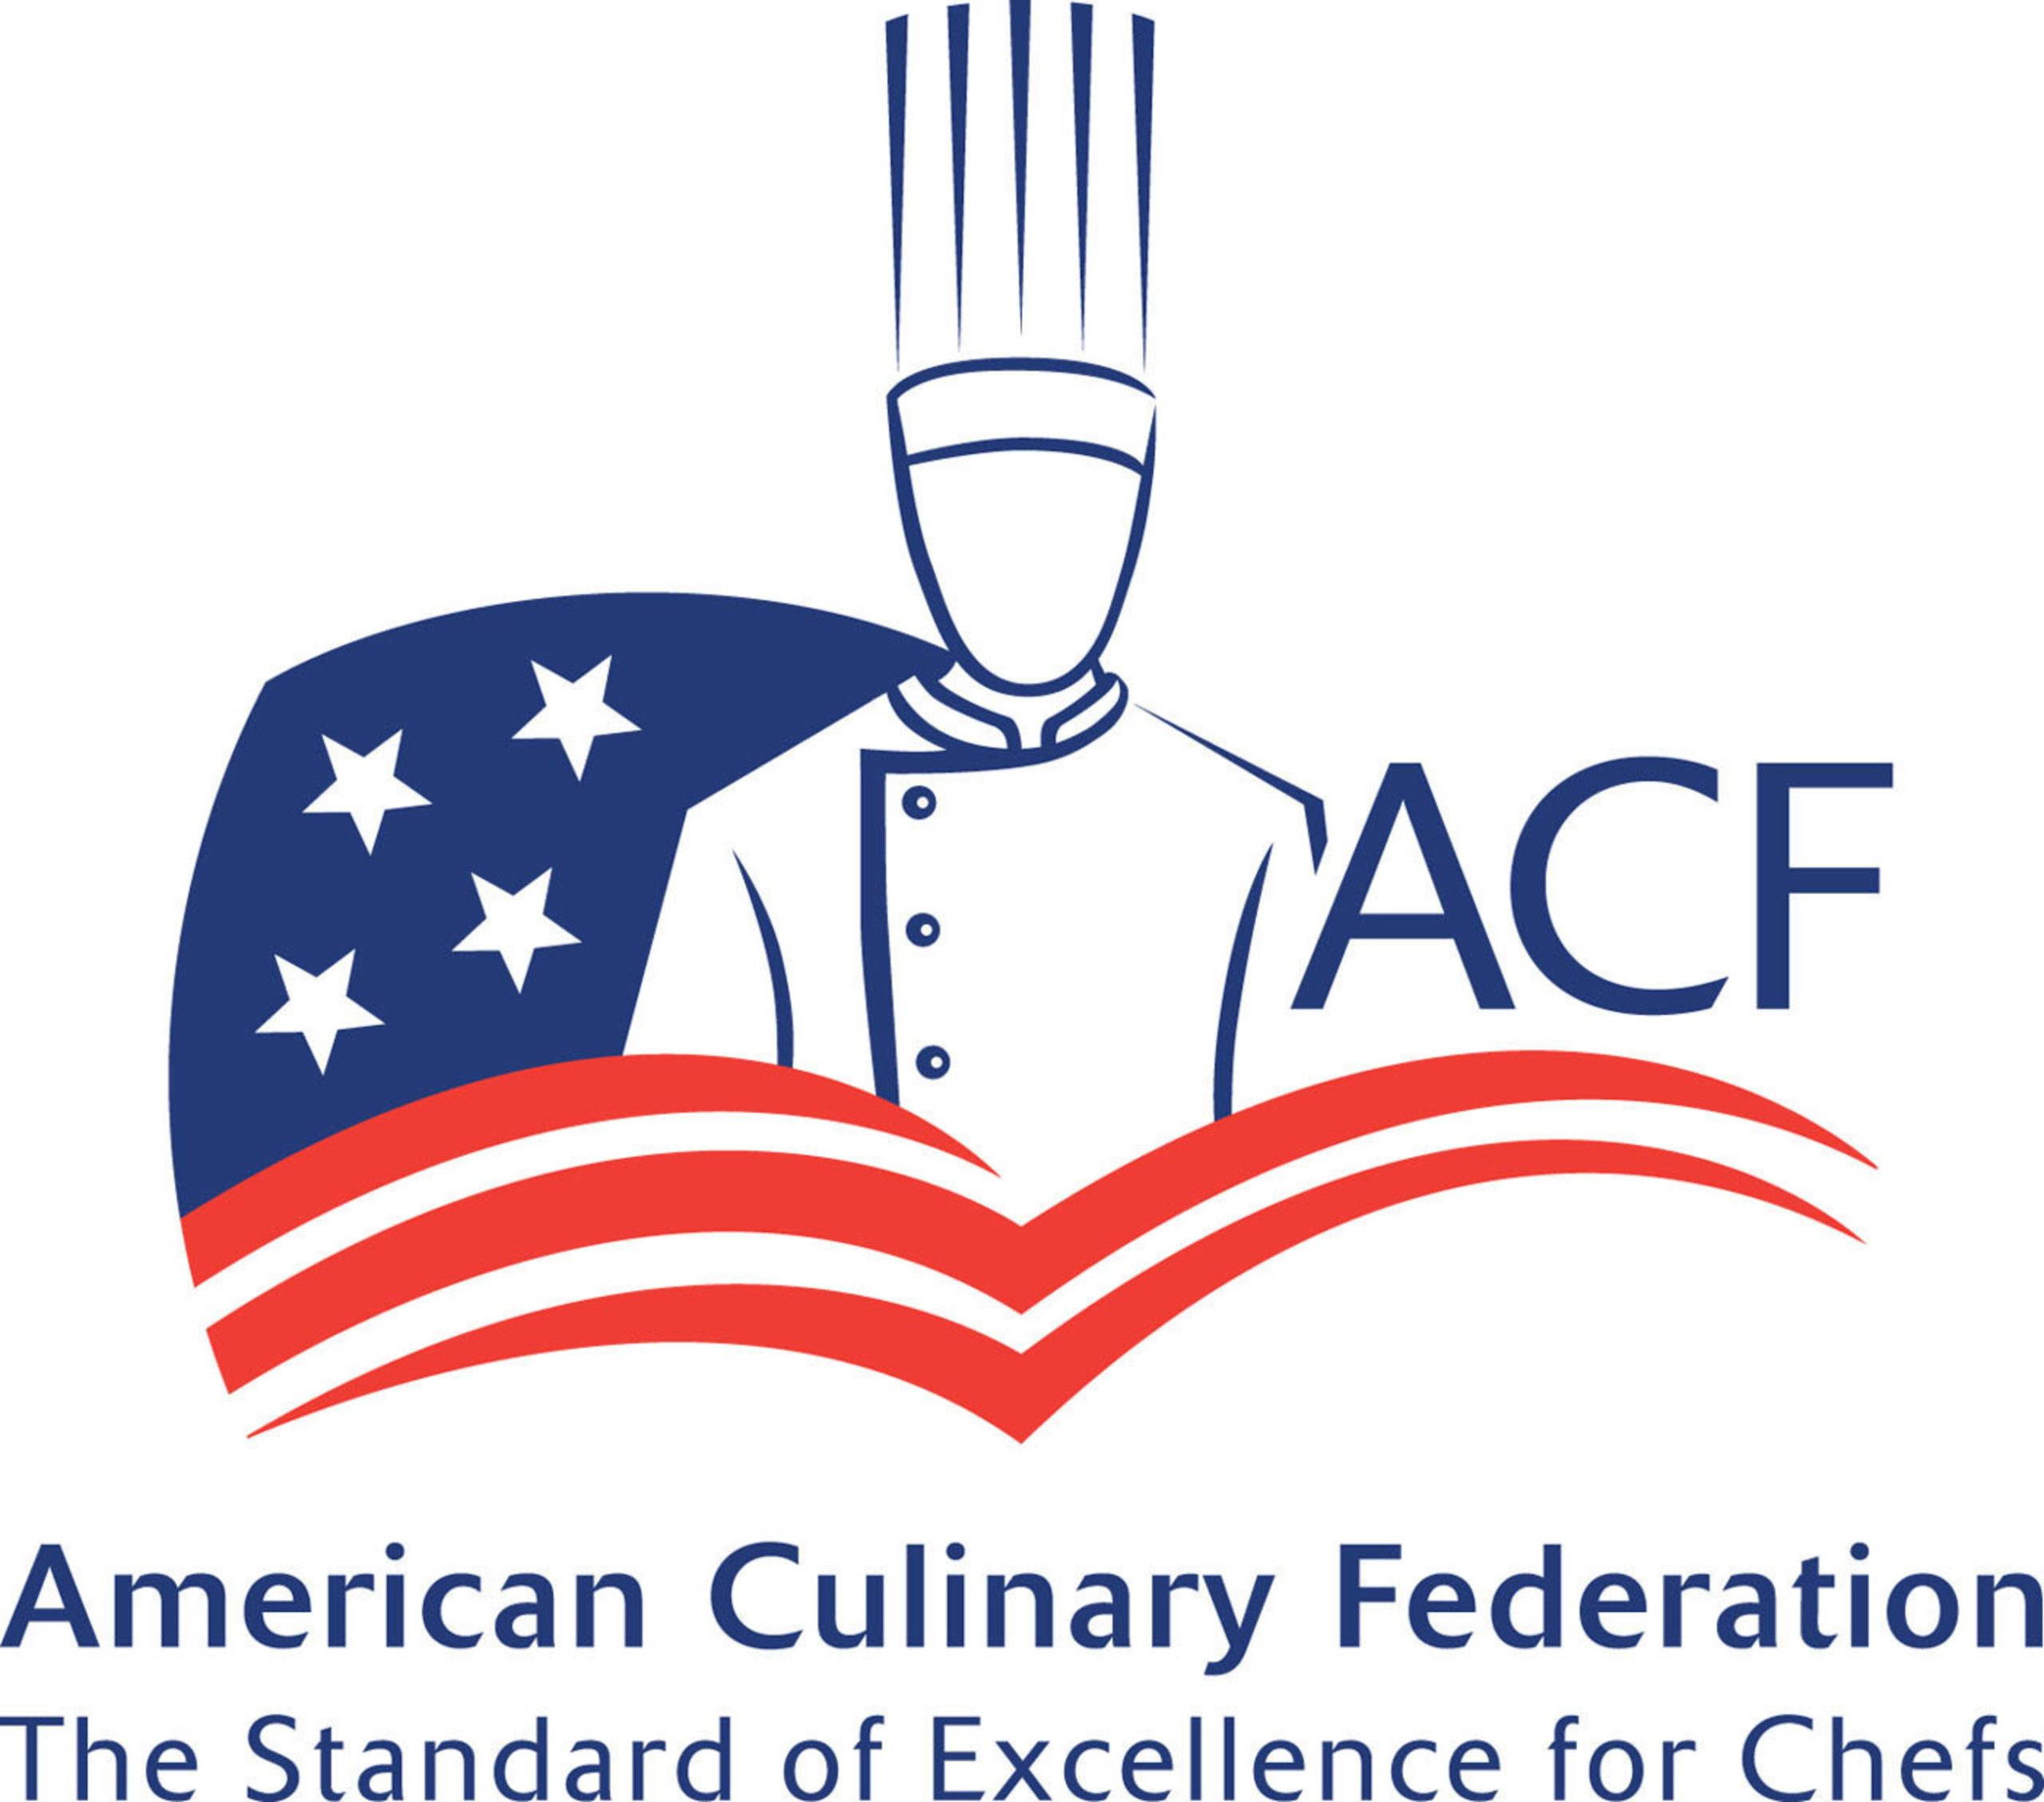 The American Culinary Federation, Inc. (ACF), established in 1929, is the premier professional organization for culinarians in North America. With more than 20,000 members spanning 200 chapters nationwide, ACF is the culinary leader in offering educational resources, training, apprenticeship and programmatic accreditation. In addition, ACF operates the most comprehensive certification program for chefs in the U.S. ACF is home to ACF Culinary Team USA, the official representative for the U.S. in international culinary competitions, and the Chef & Child Foundation to promote proper childhood nutrition. Learn more at www.acfchefs.org and find ACF on Facebook at www.facebook.com/ACFChefs and Twitter @ACFChefs.  (PRNewsFoto/American Culinary Federation)